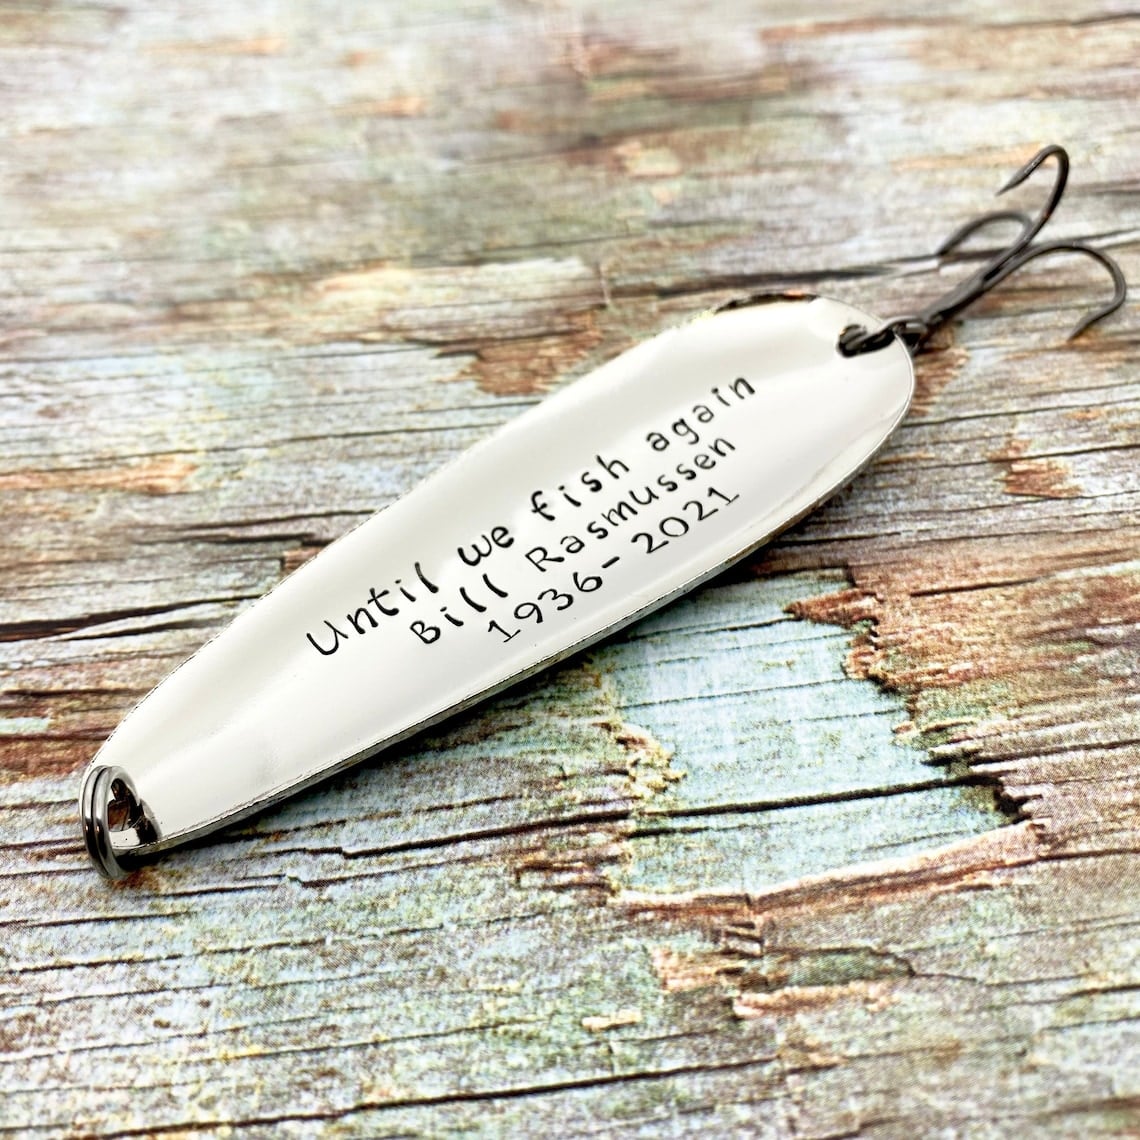 until we fish again commemorative hand stamped personalized metal fishing lure in memory of a loved one who past away with the birth and death years. Also a great commemoration gift for death anniversary